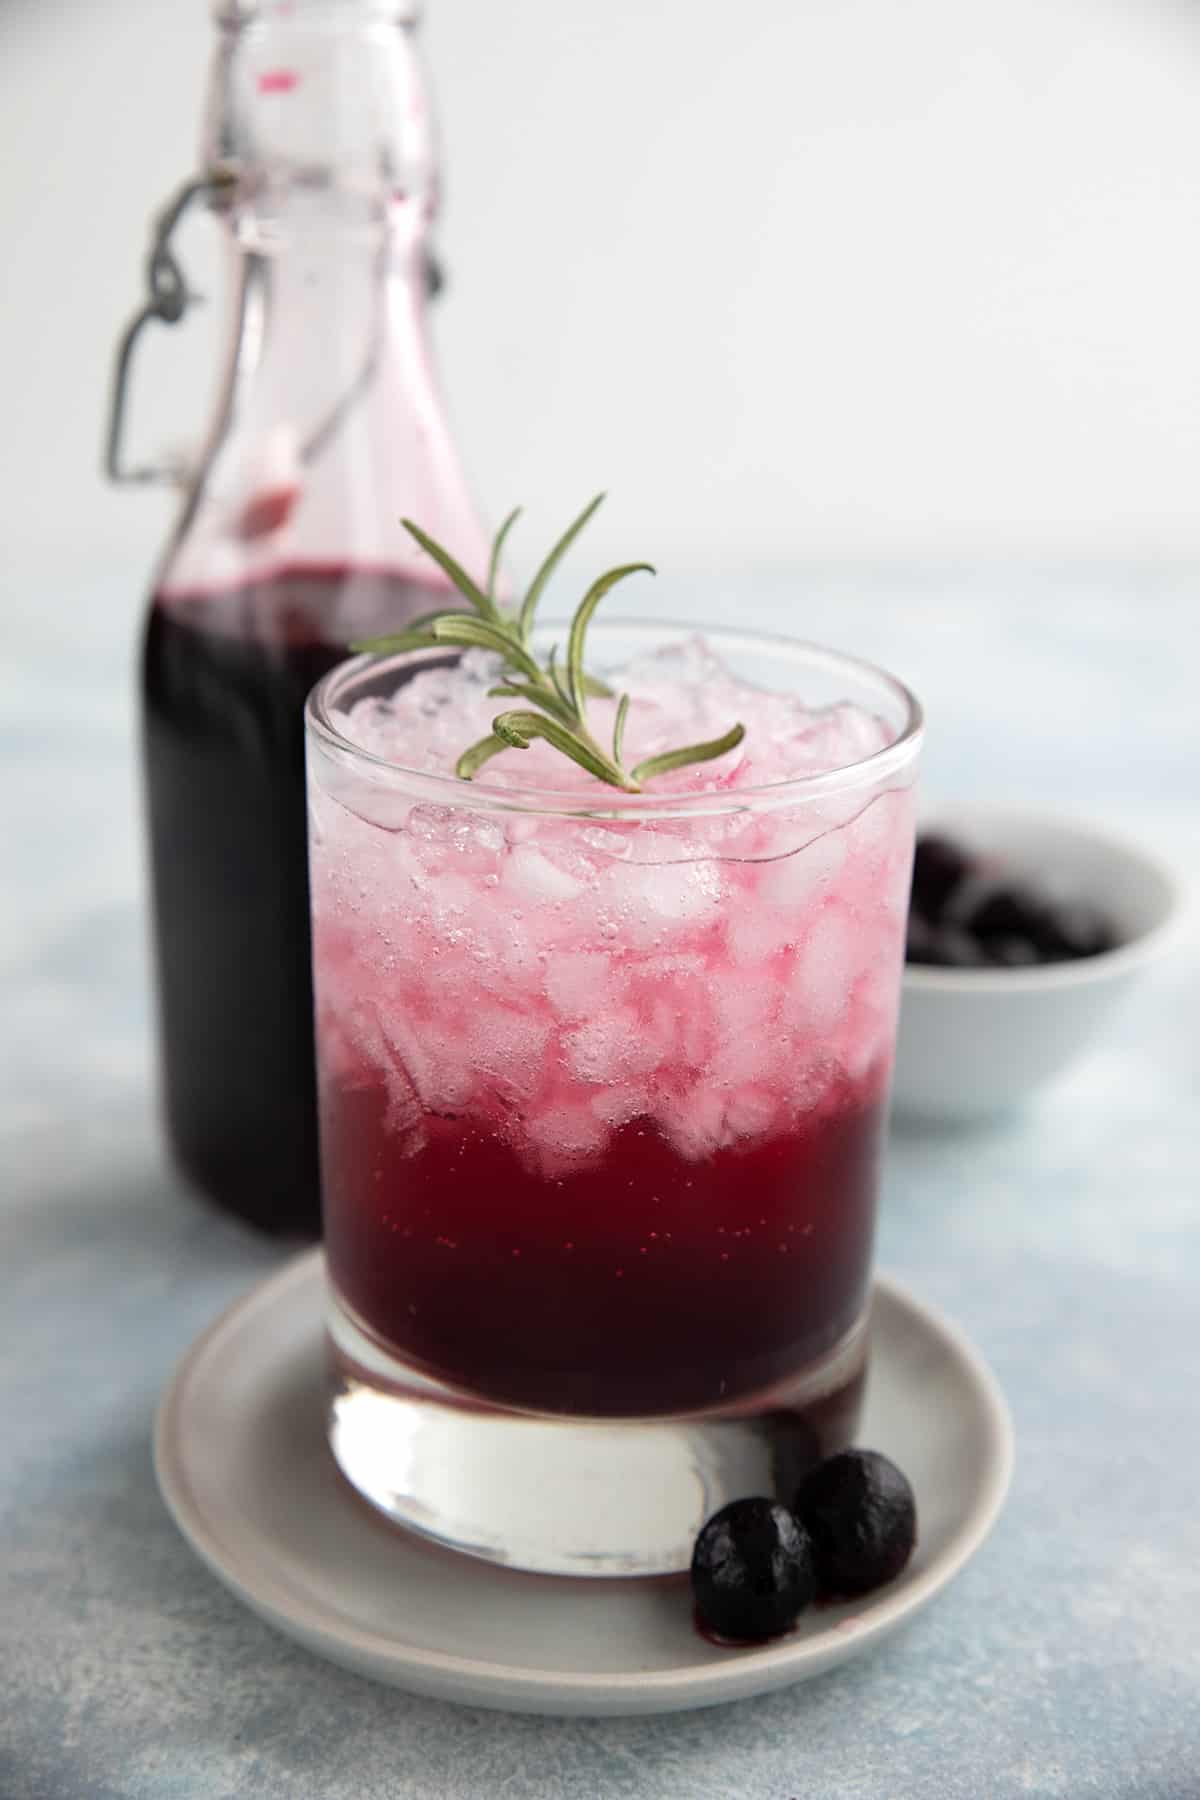 A low carb cocktail made with keto blueberry syrup.